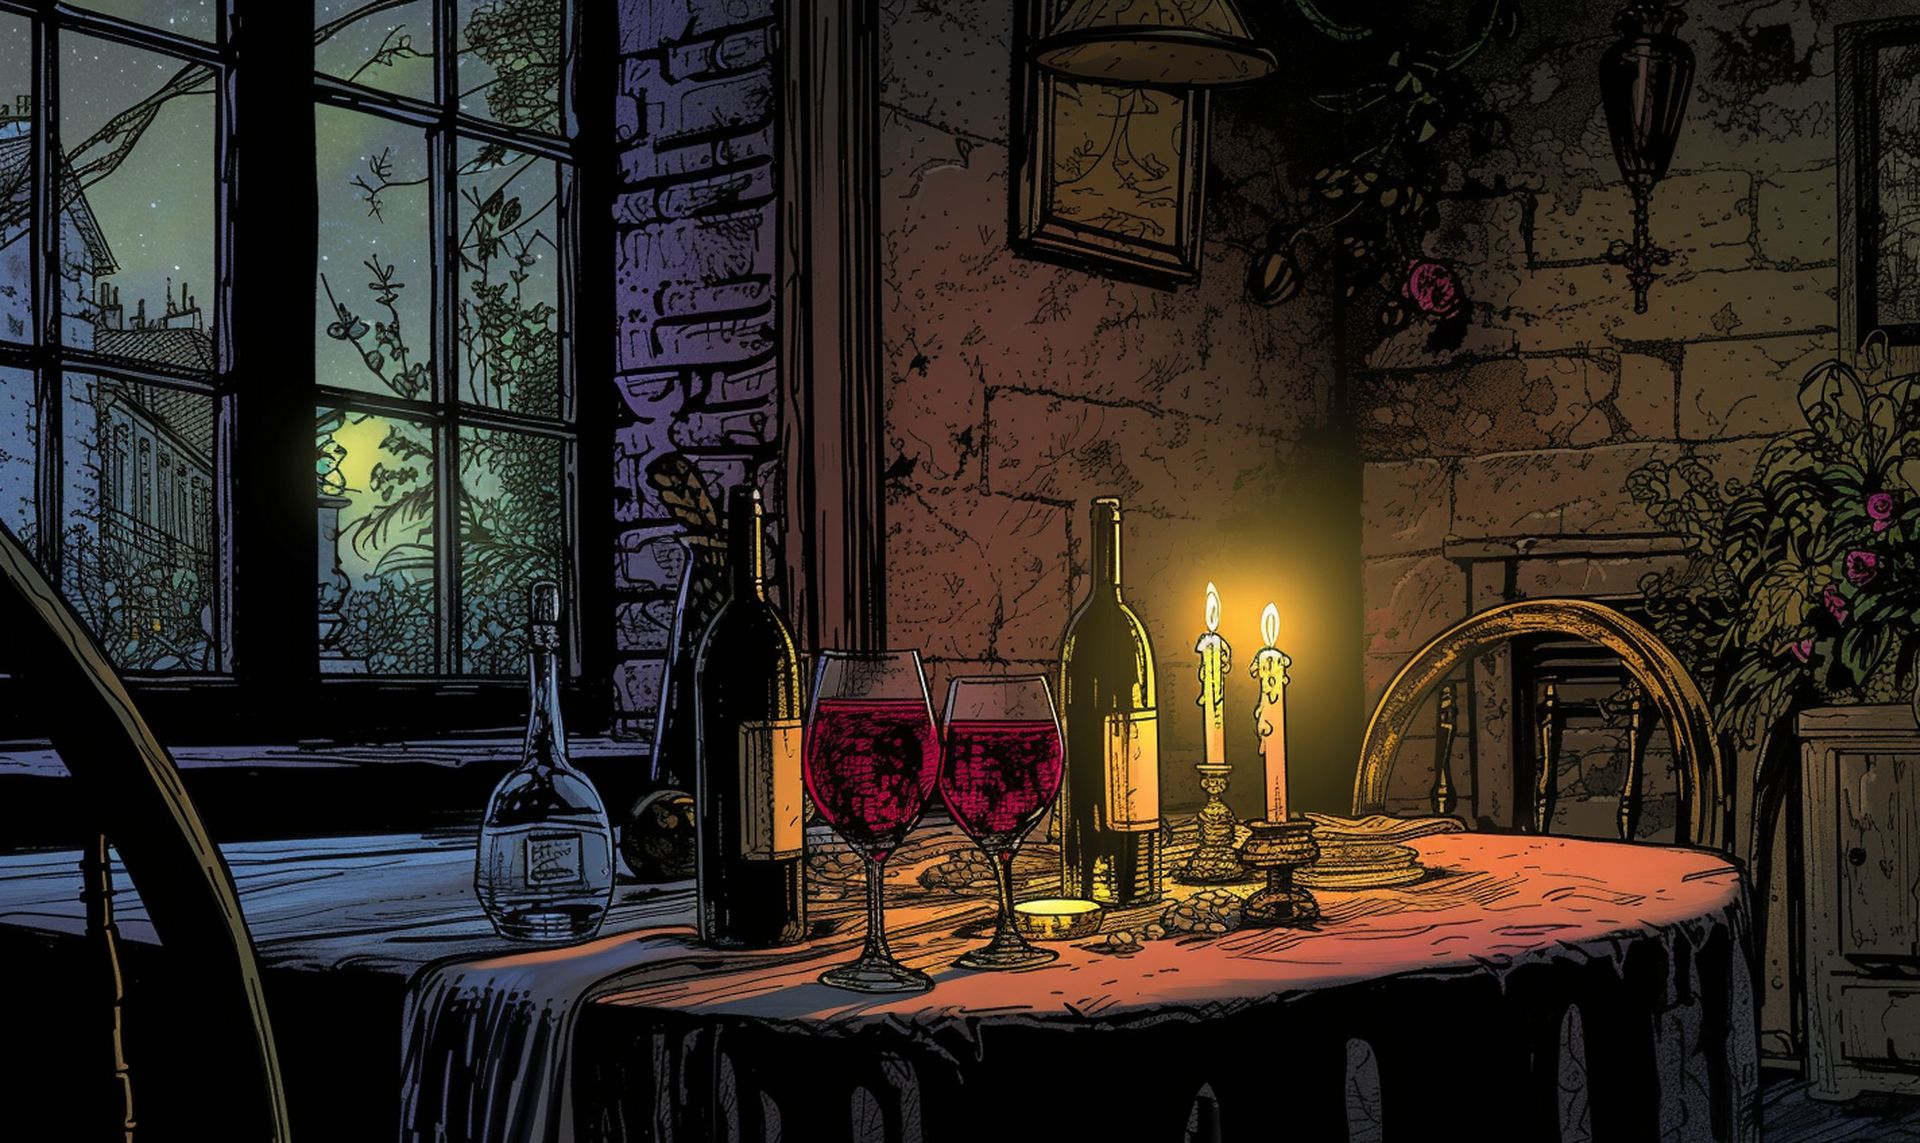 a romantic dinner setting with a table adorned with wine and candles, | image credit: merasturda enkeste